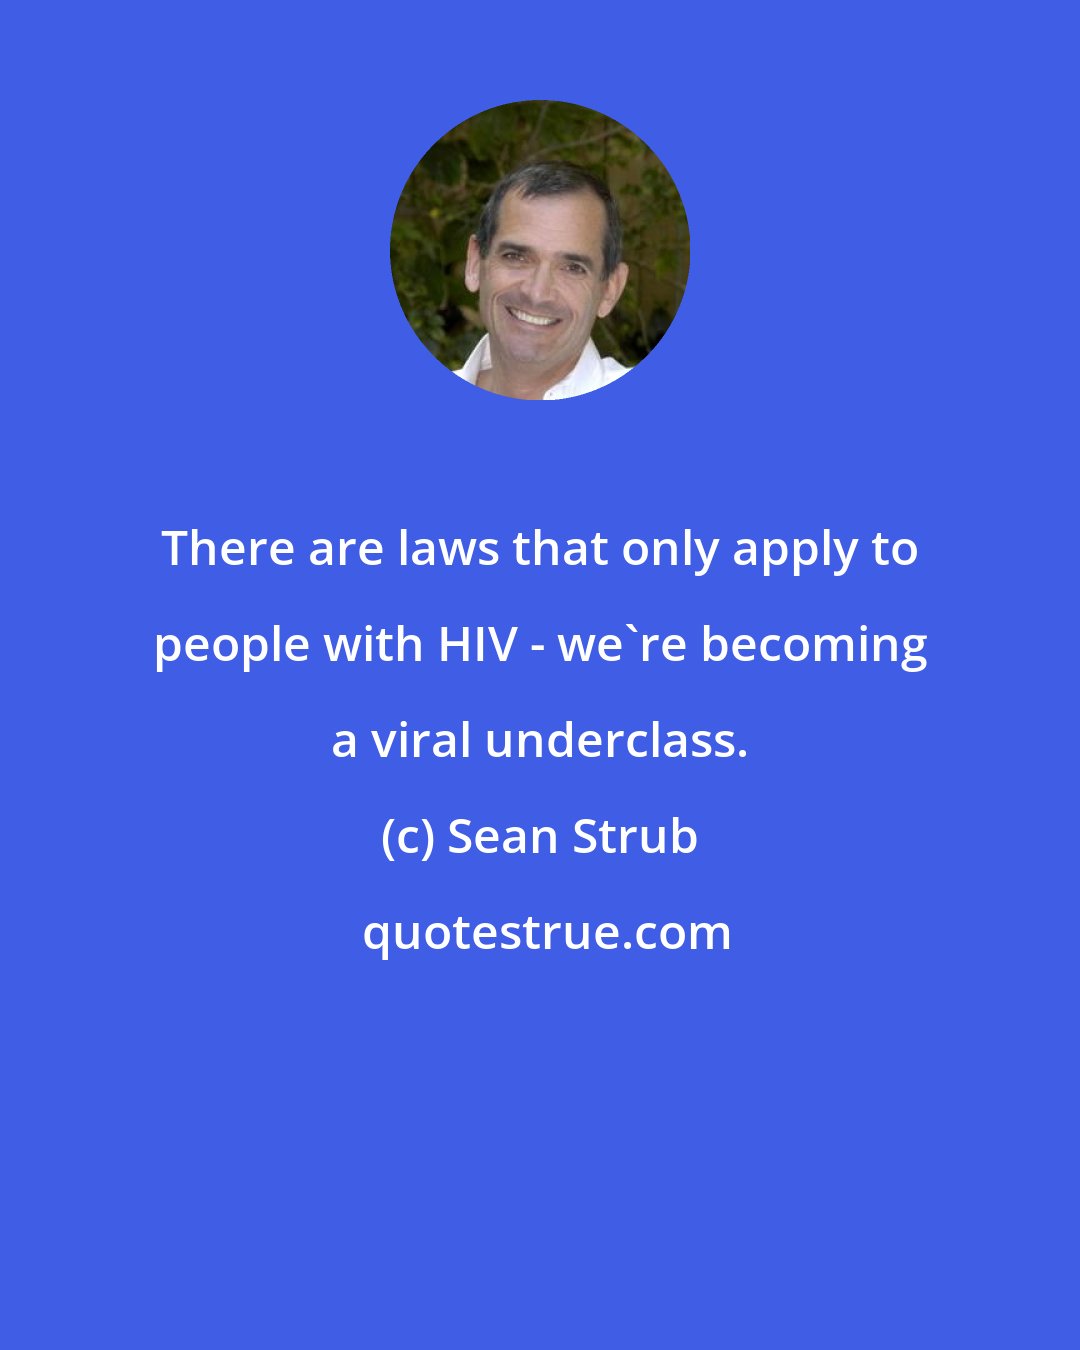 Sean Strub: There are laws that only apply to people with HIV - we're becoming a viral underclass.